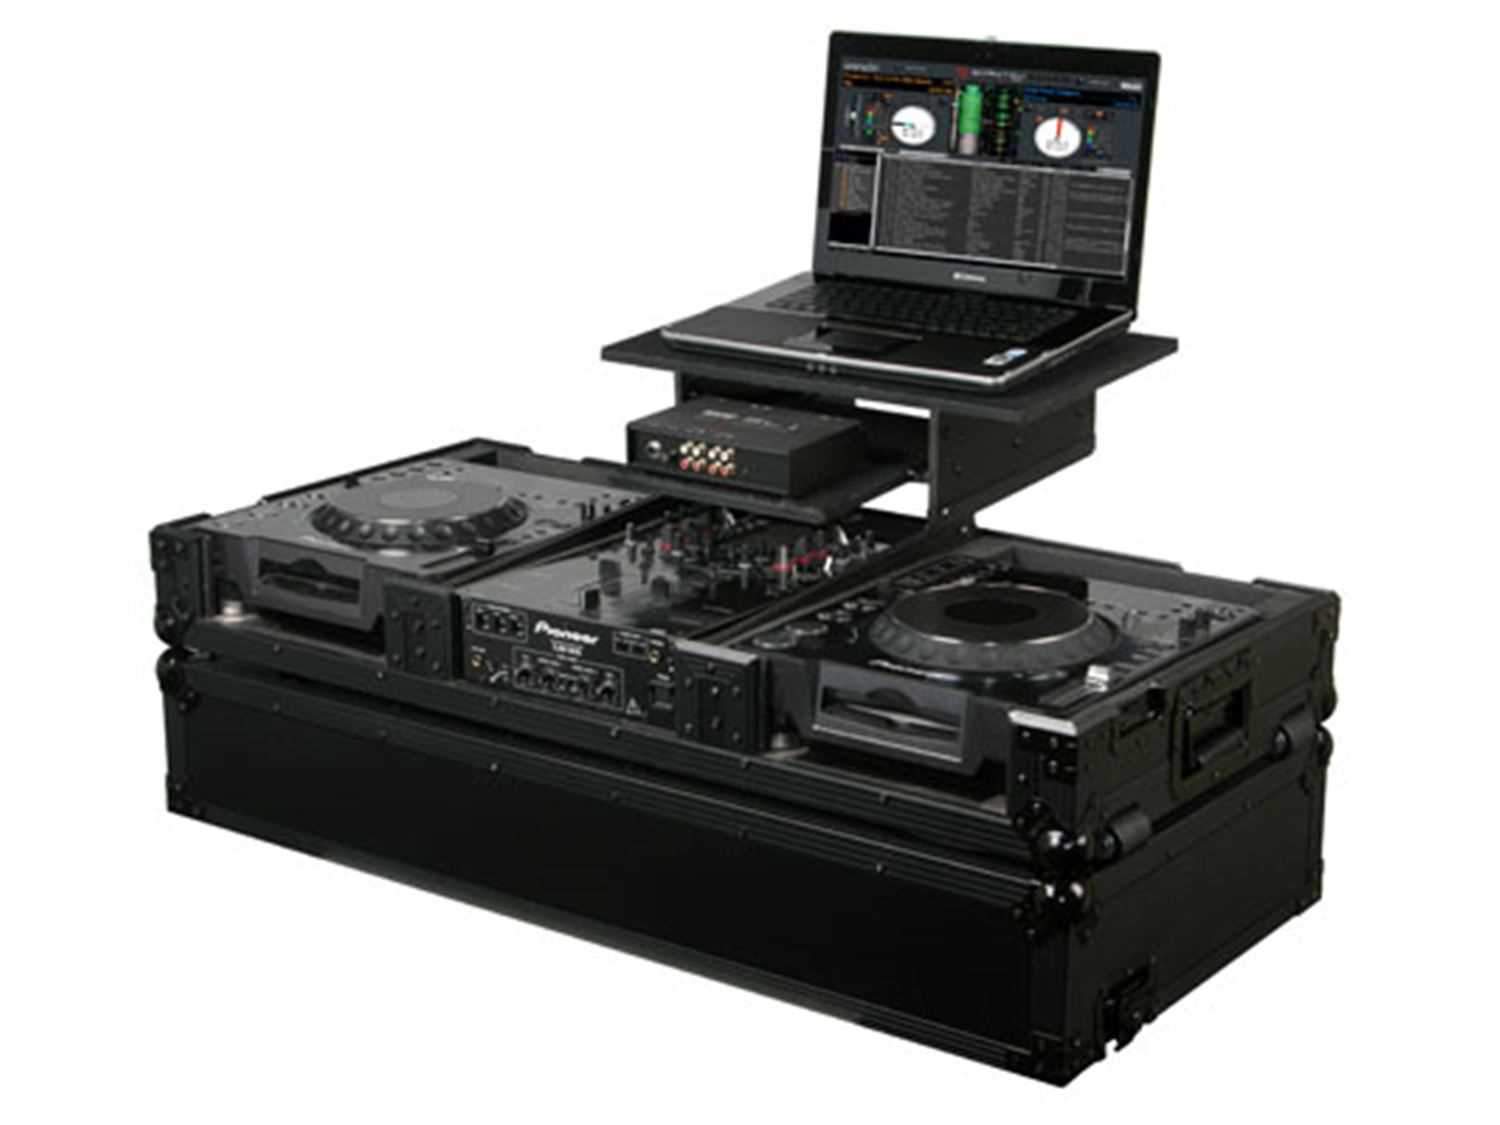 Odyssey FZGS10CDJWBL Black Glide DJ Coffin for 2 CD Players and 10-Inch Mixer - ProSound and Stage Lighting